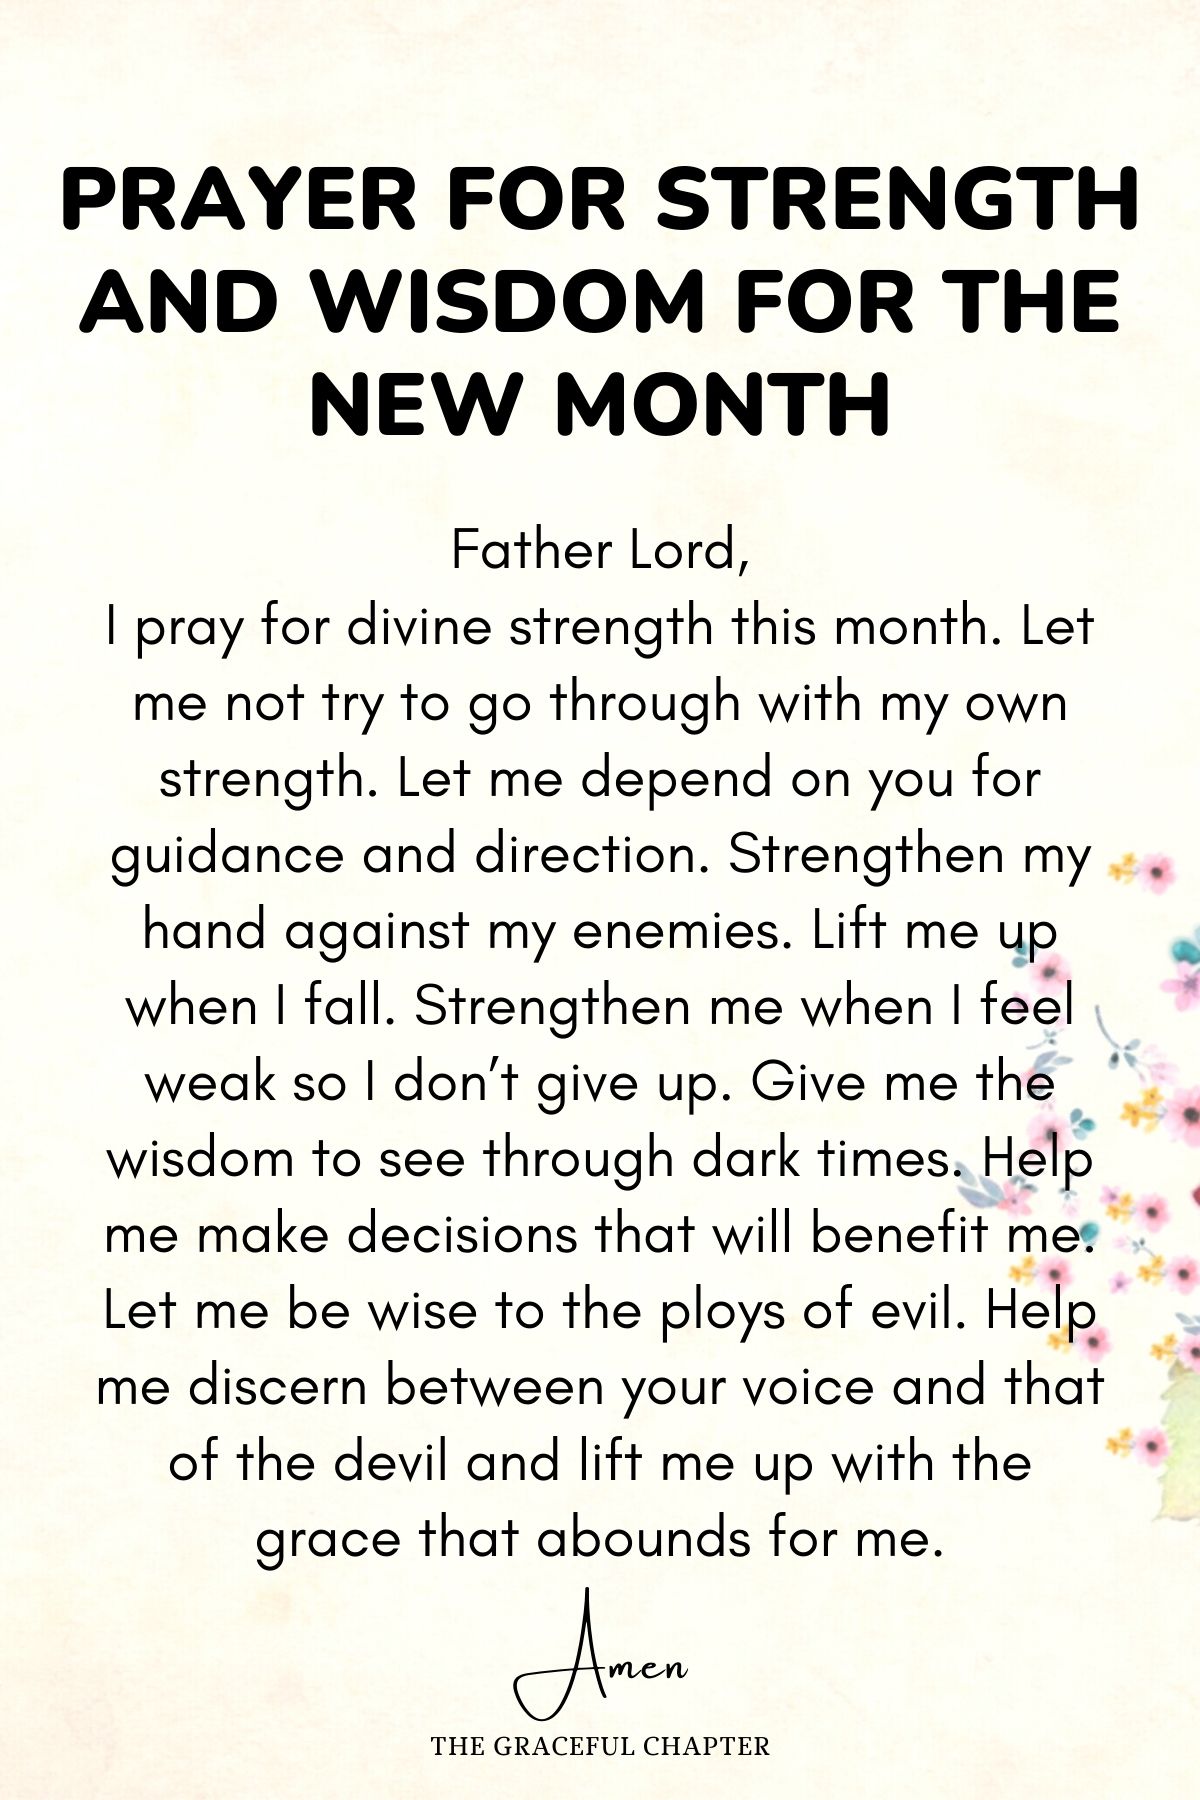 Strength and wisdom for the new month